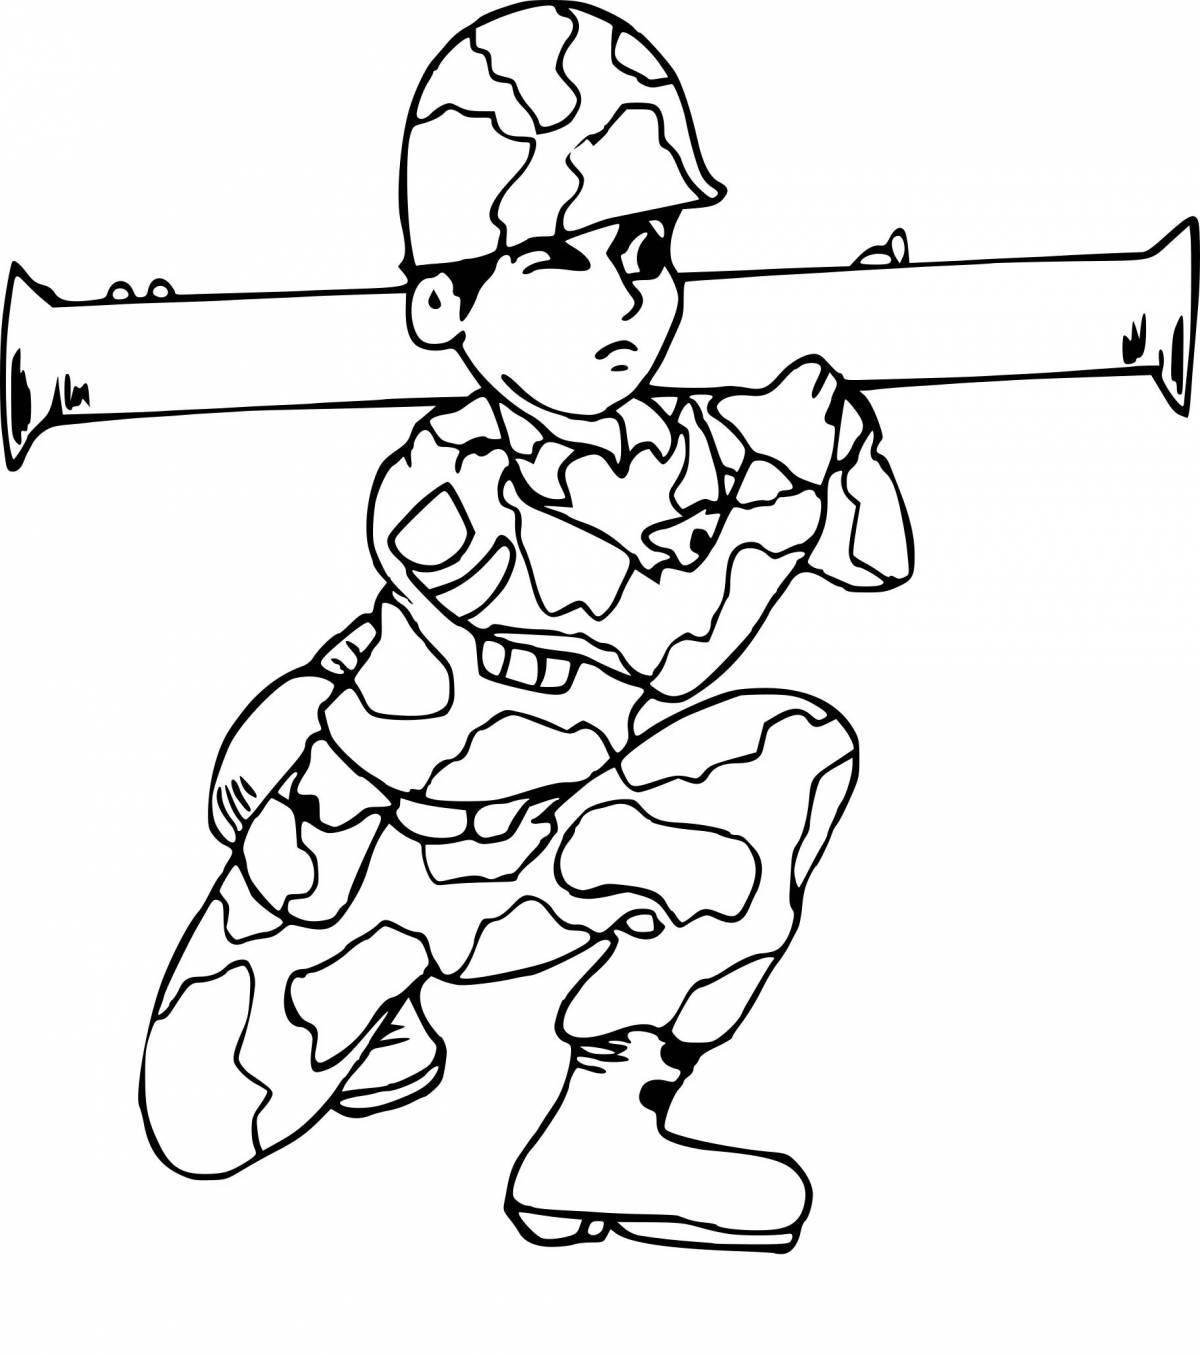 Exciting toy soldier coloring pages